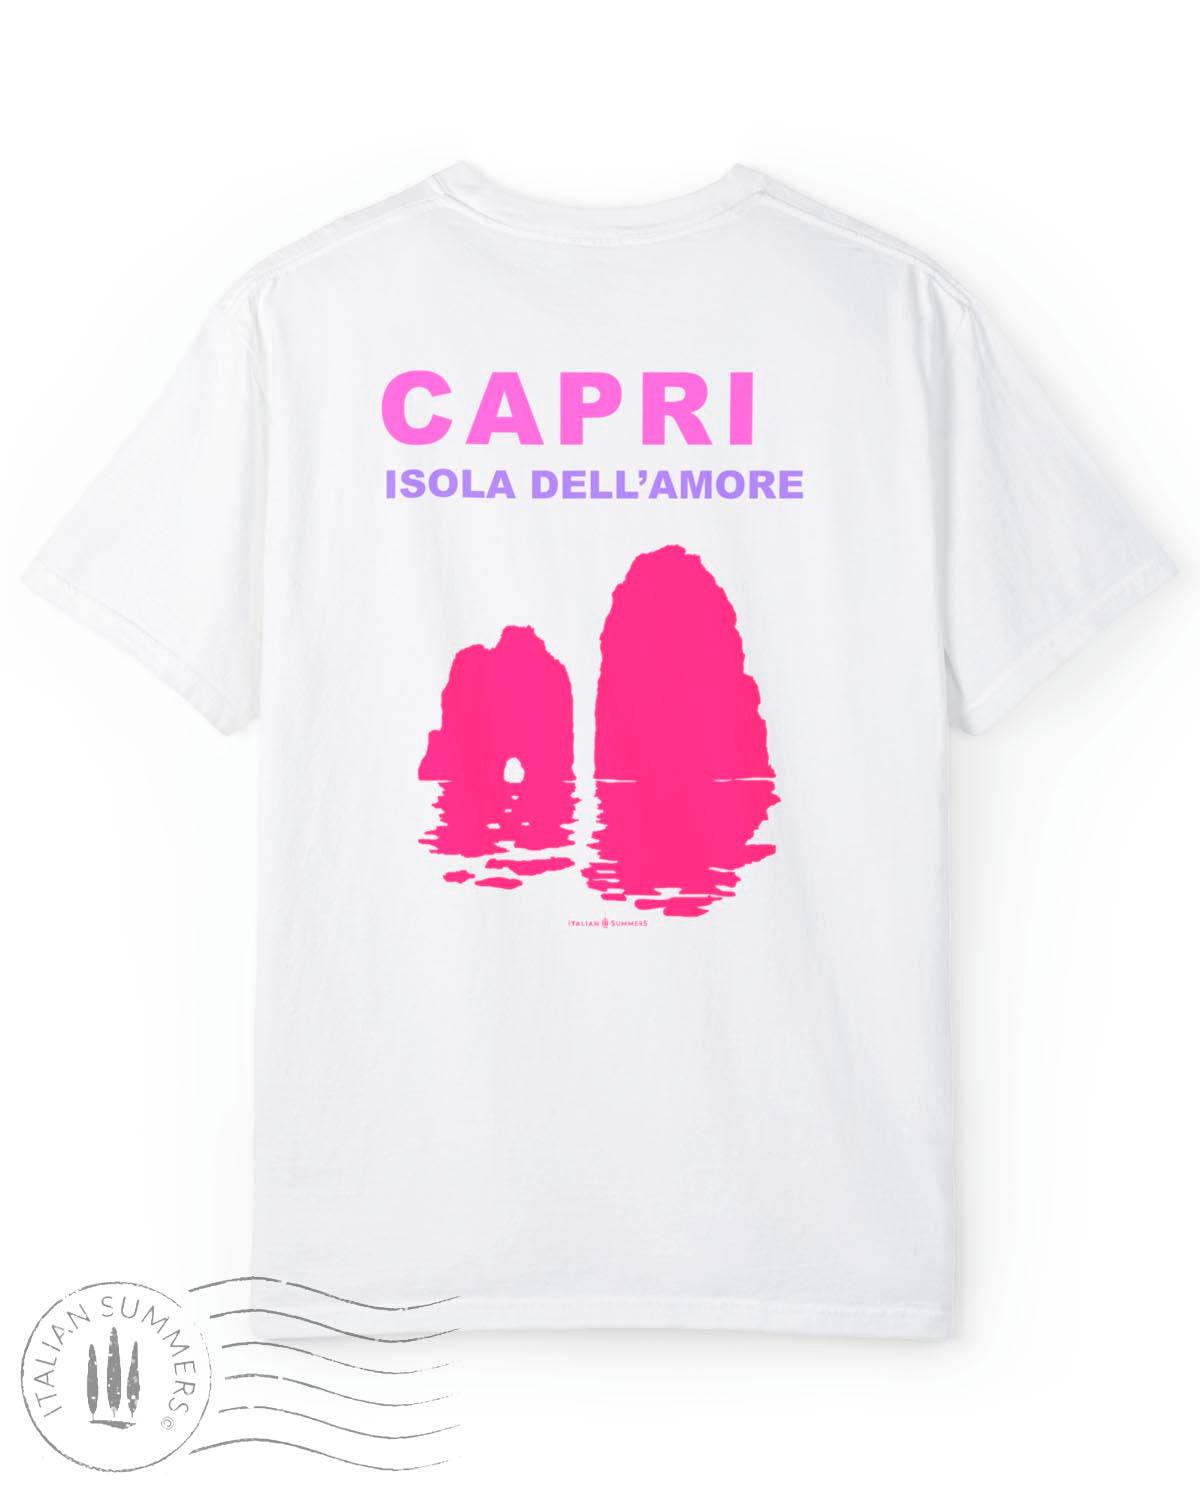  A soft white cotton shirt with a pink and fuchsia print depicting the Faraglioni islets  of the famous island of Capri.  The text on the print states " Capri Isola dell'Amore" Capri, island of love.